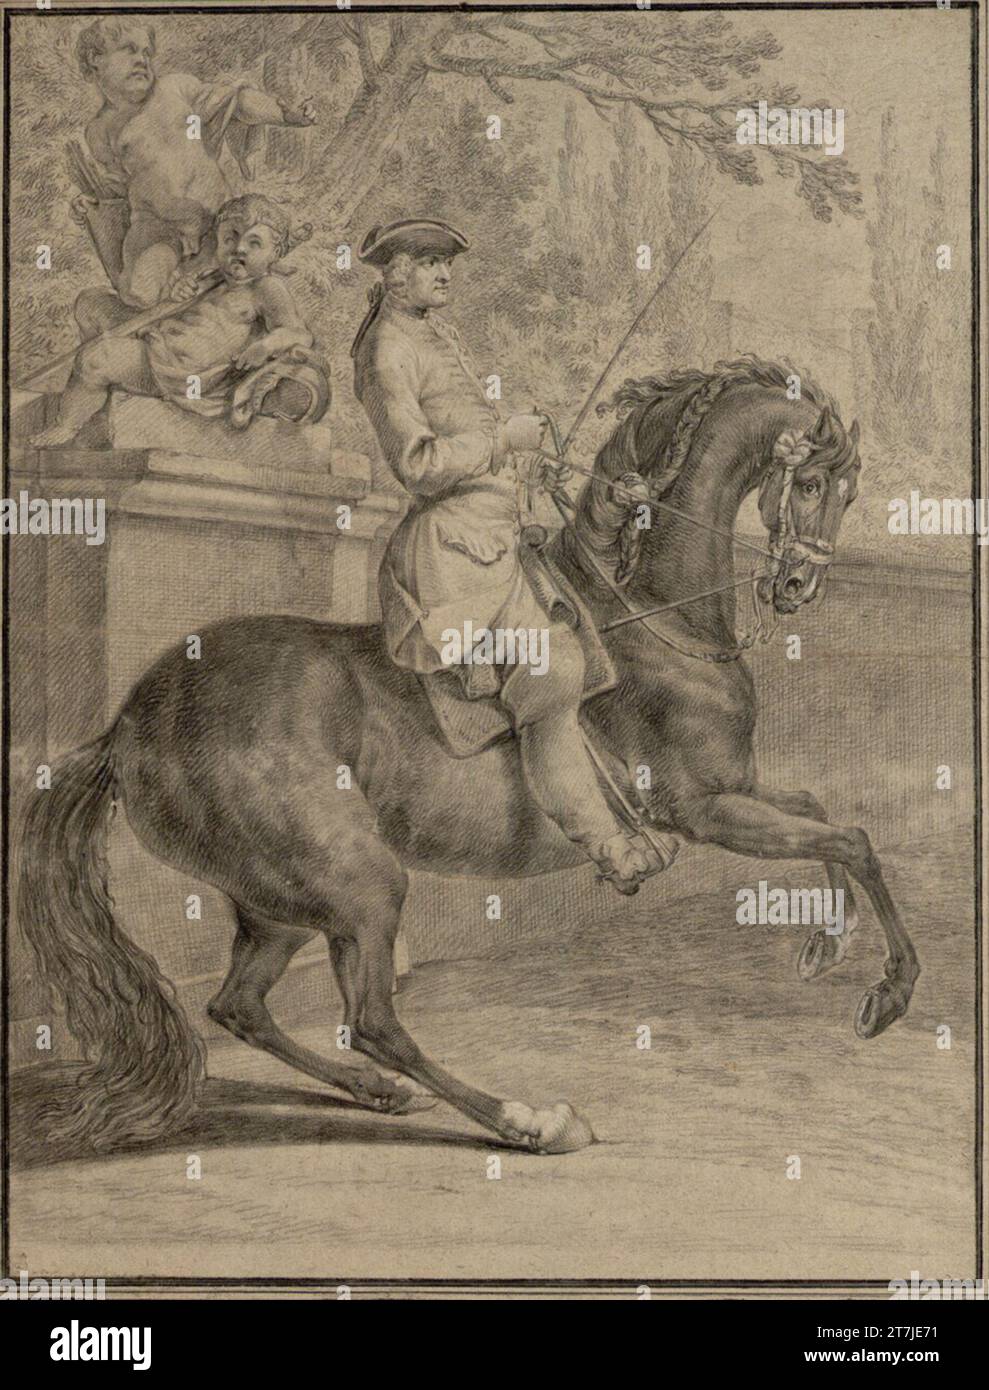 Johann Elias Ridinger The parade in Linck's crotch. Reddish, black and white chalk on light -brown paper Stock Photo